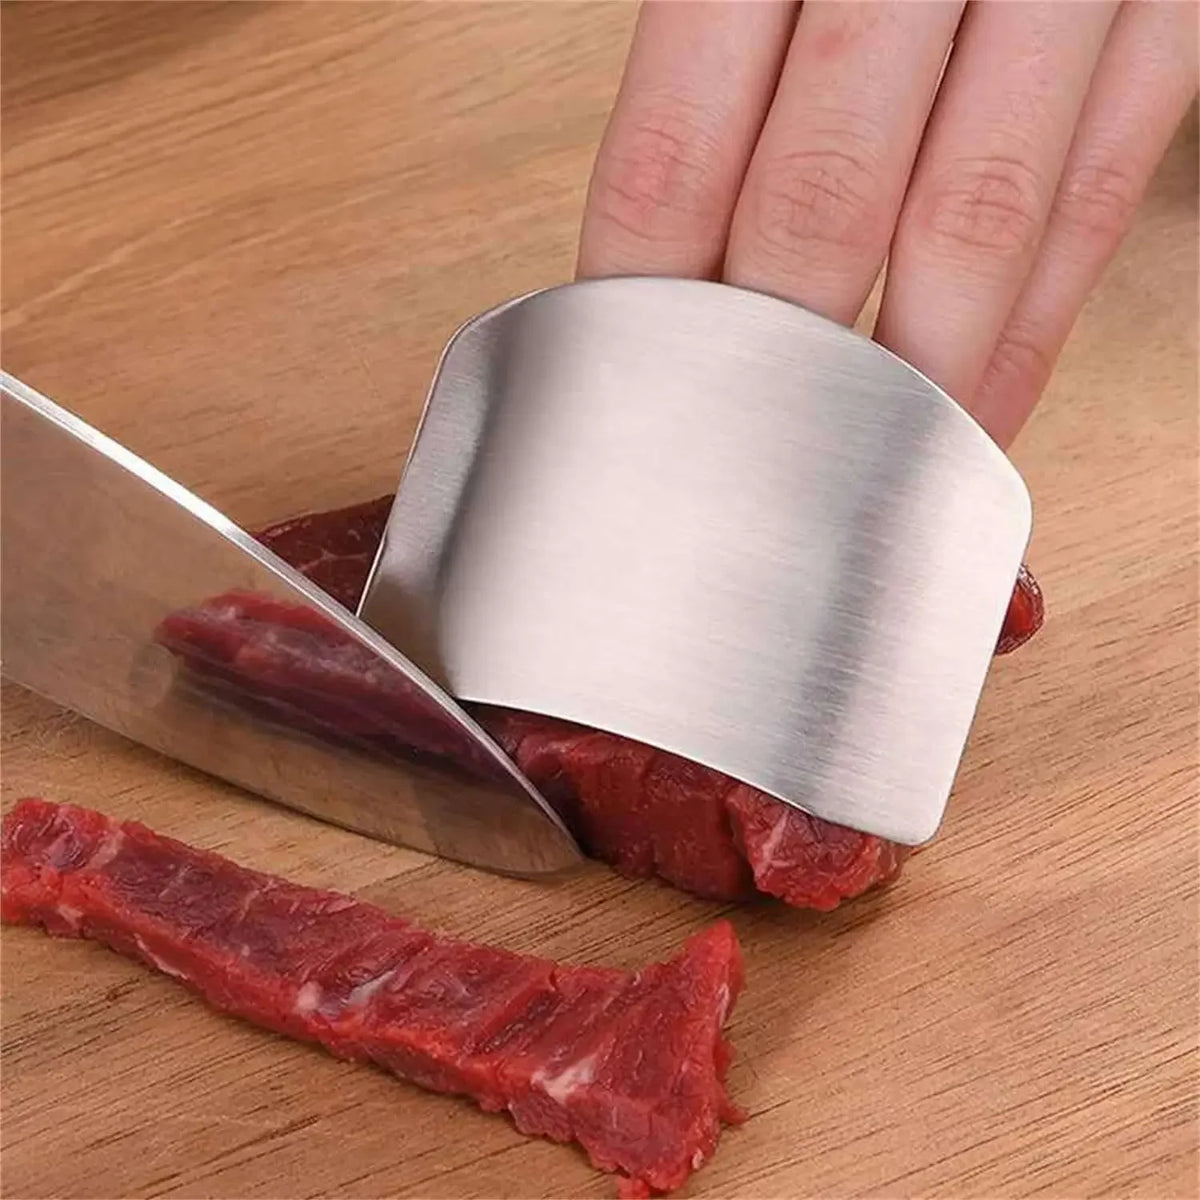 Stainless Steel Finger Guard Cutting Shiel Adjustable Vegetable Cutting Thumb Guard Finger Protector Tools Kitchen Gadget